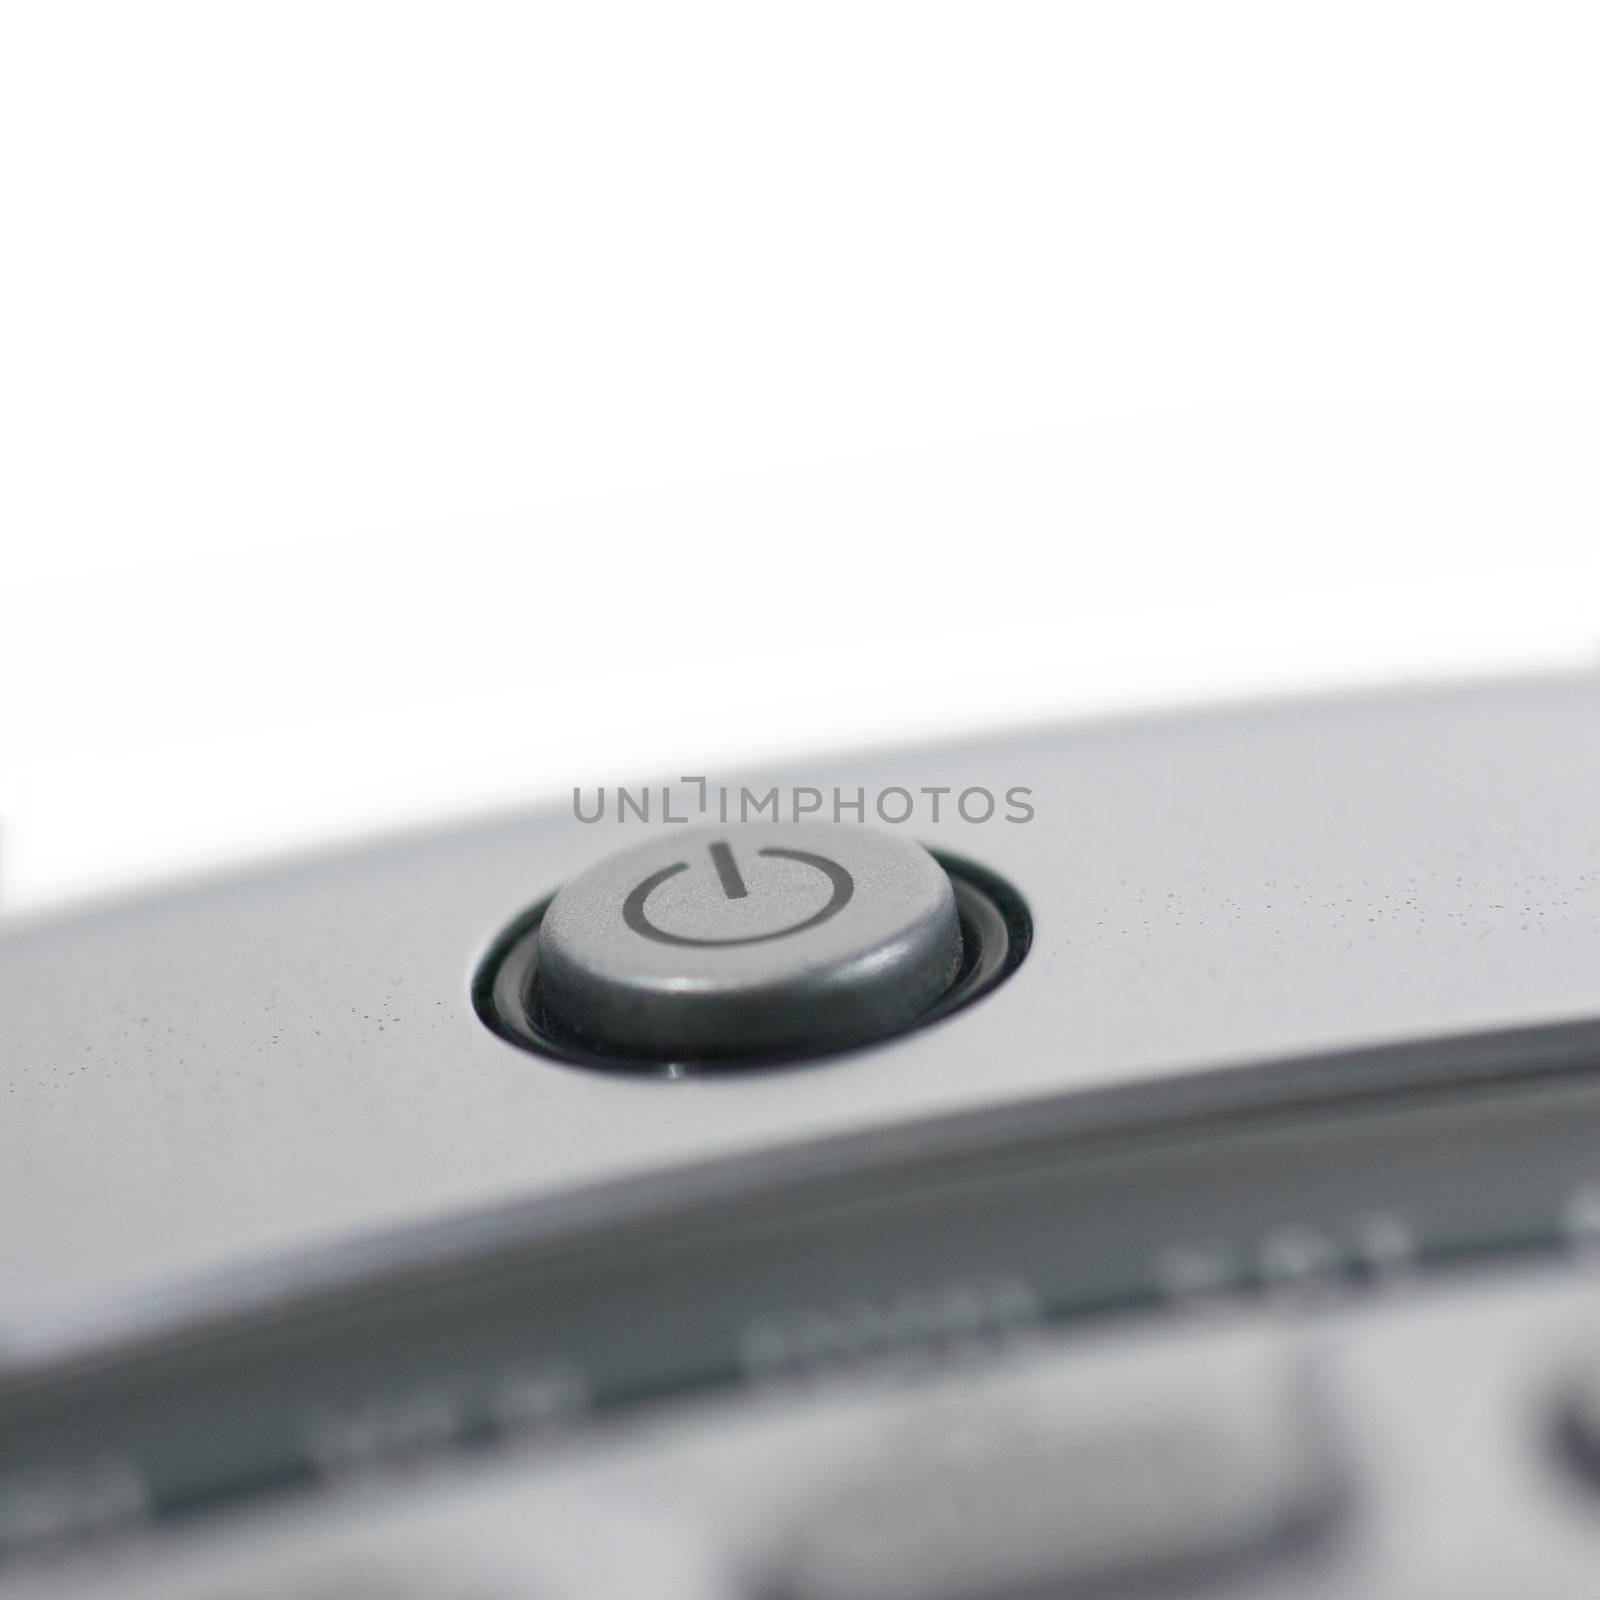 Remote control closeup by woodygraphs